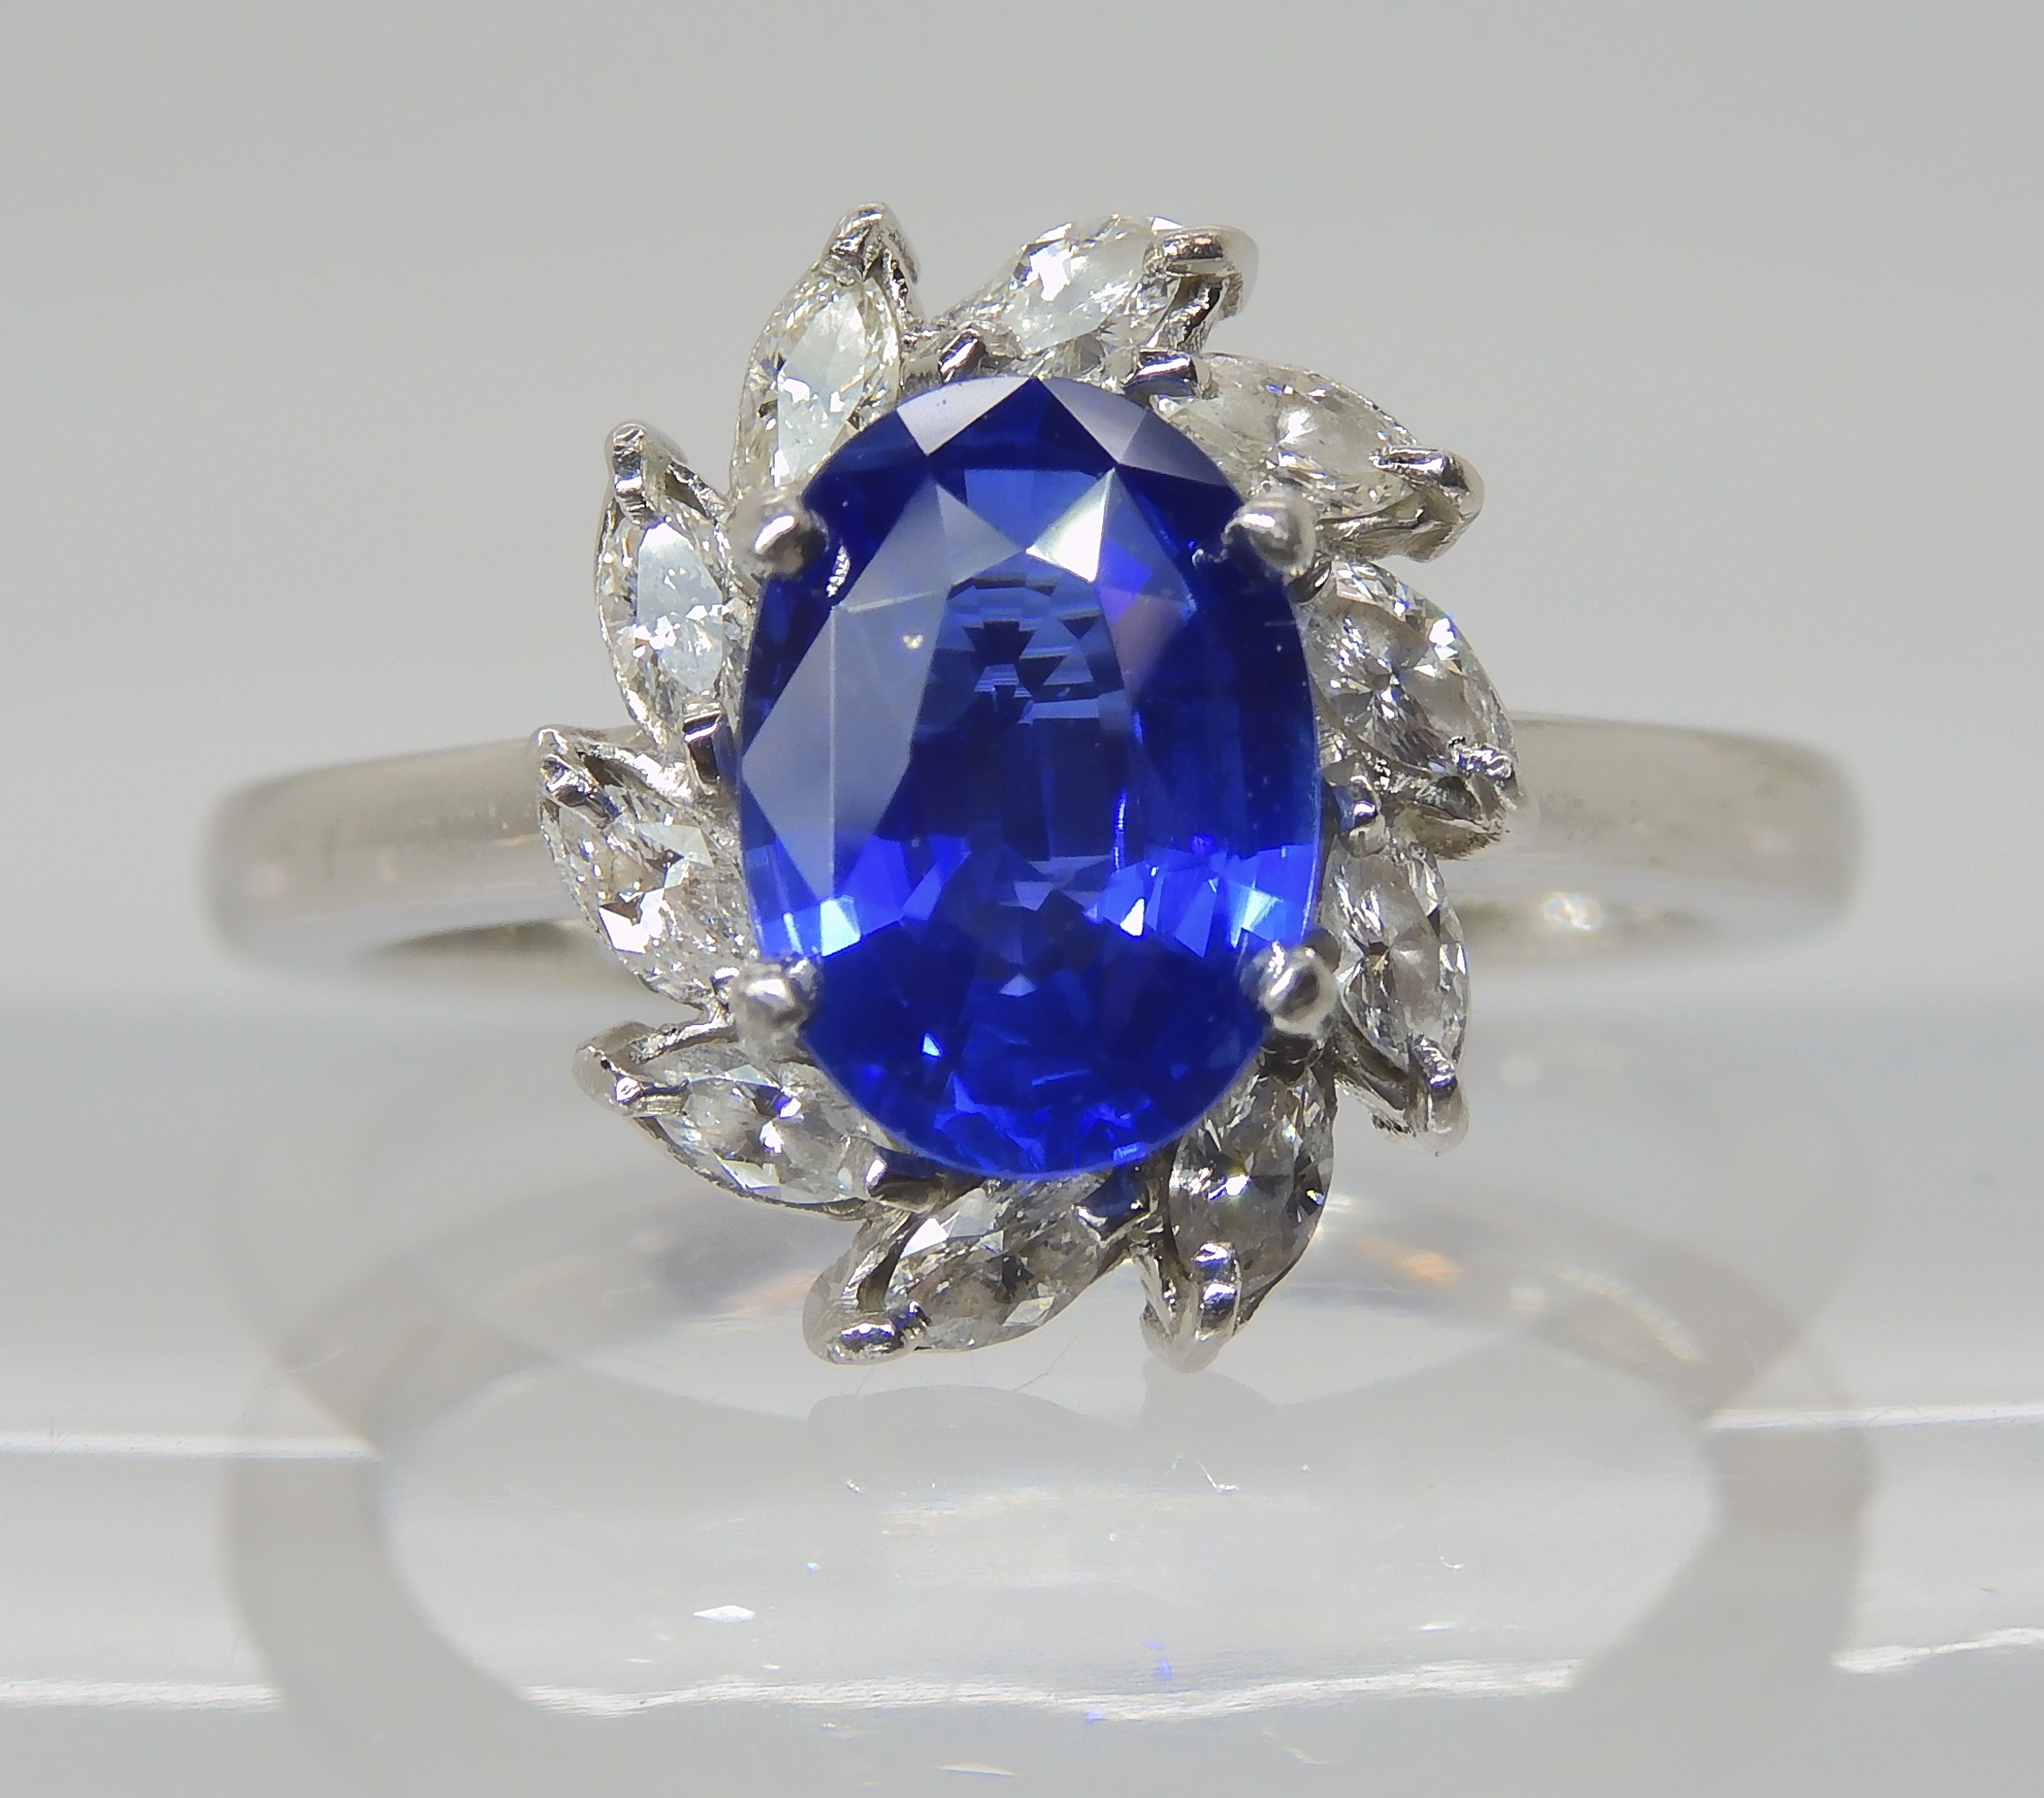 A PLATINUM SAPPHIRE AND DIAMOND RING made by Blair & Sheridan, the 8.2 x 5.9 x 3.5mm sapphire is